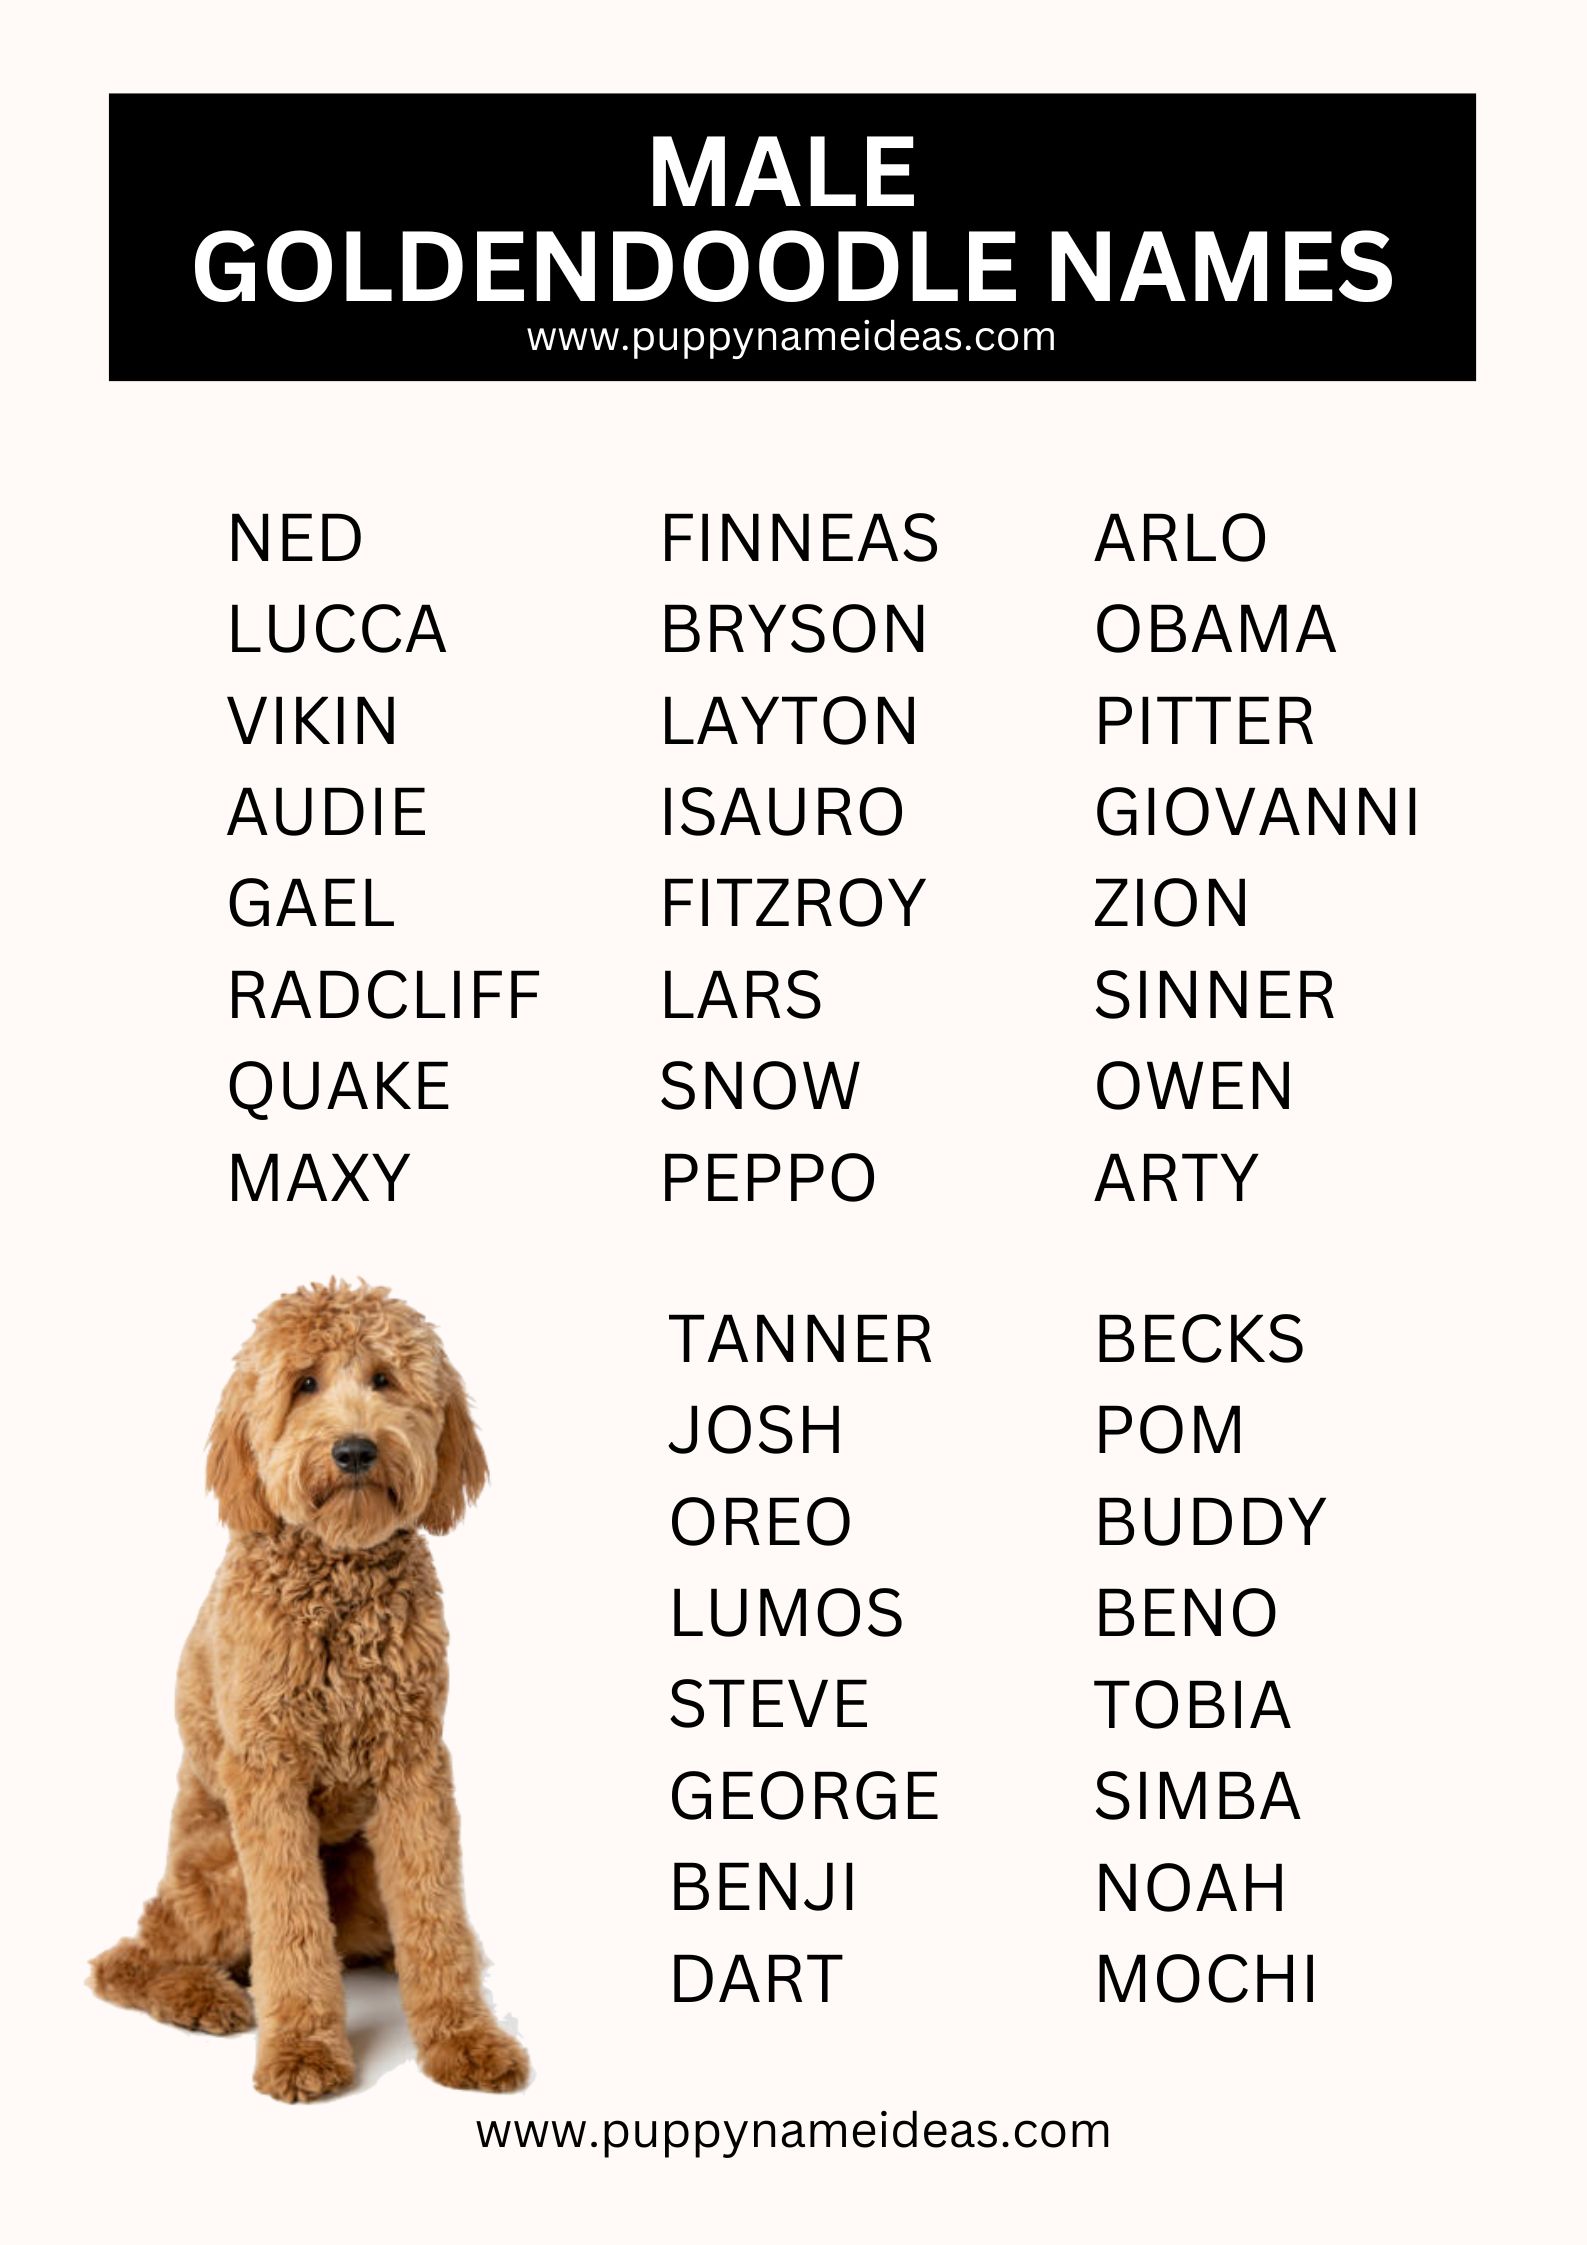 List Of Male Goldendoodle Names